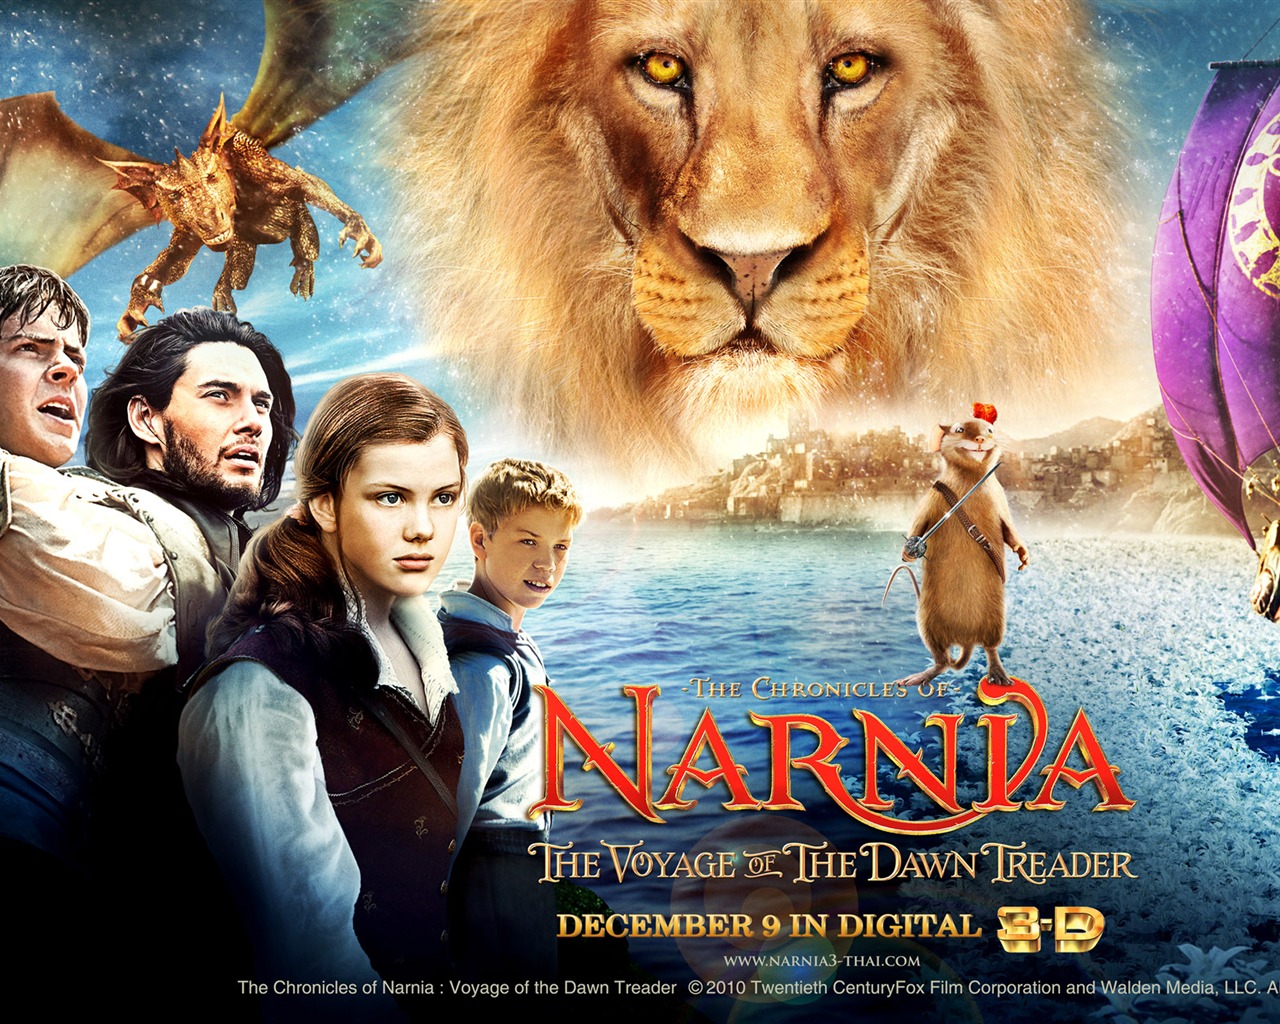 The Chronicles of Narnia: The Voyage of the Dawn Treader wallpapers #14 - 1280x1024